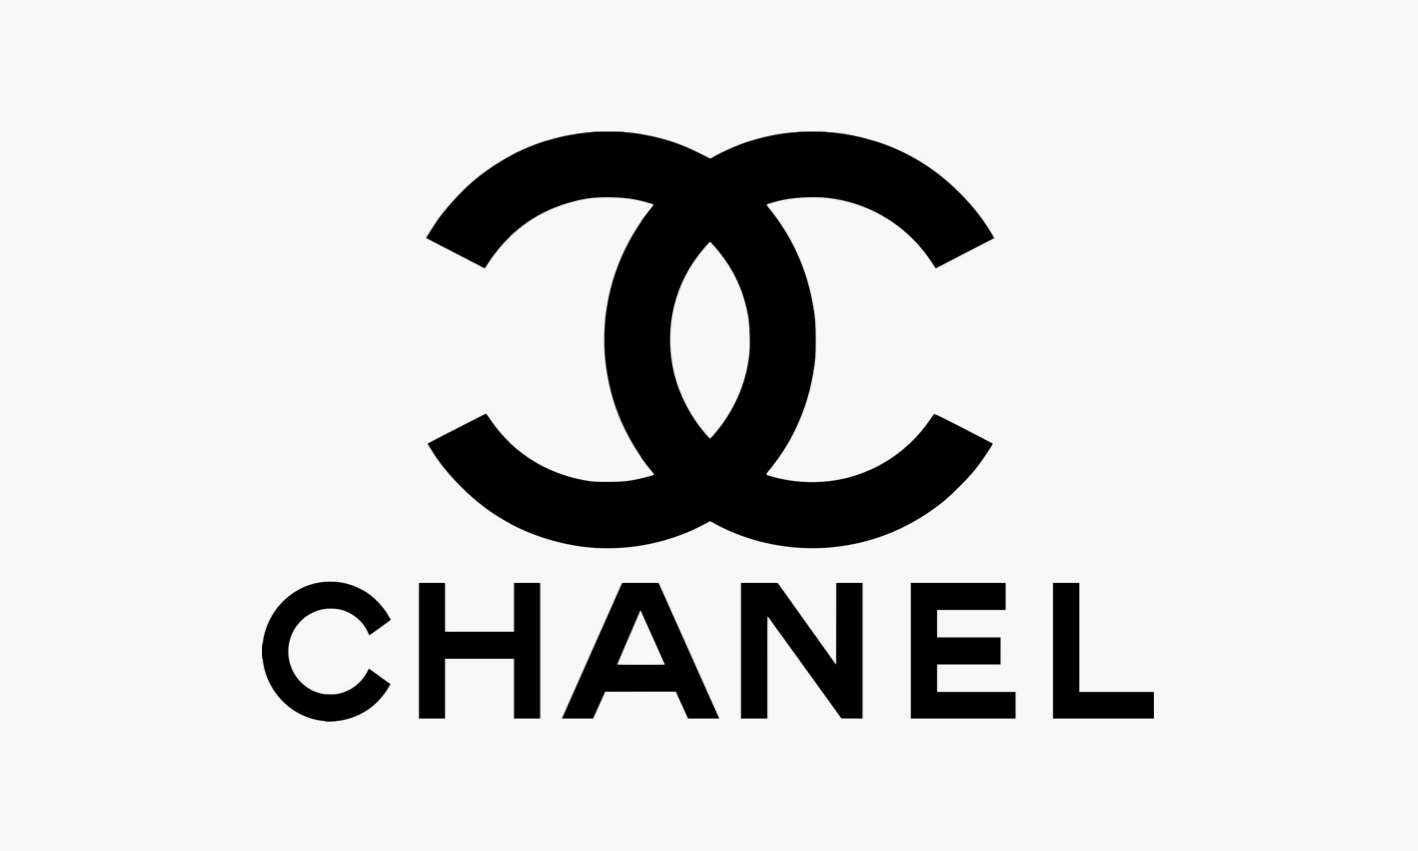 The Most Famous Luxury And High-End Fashion Brand Logos